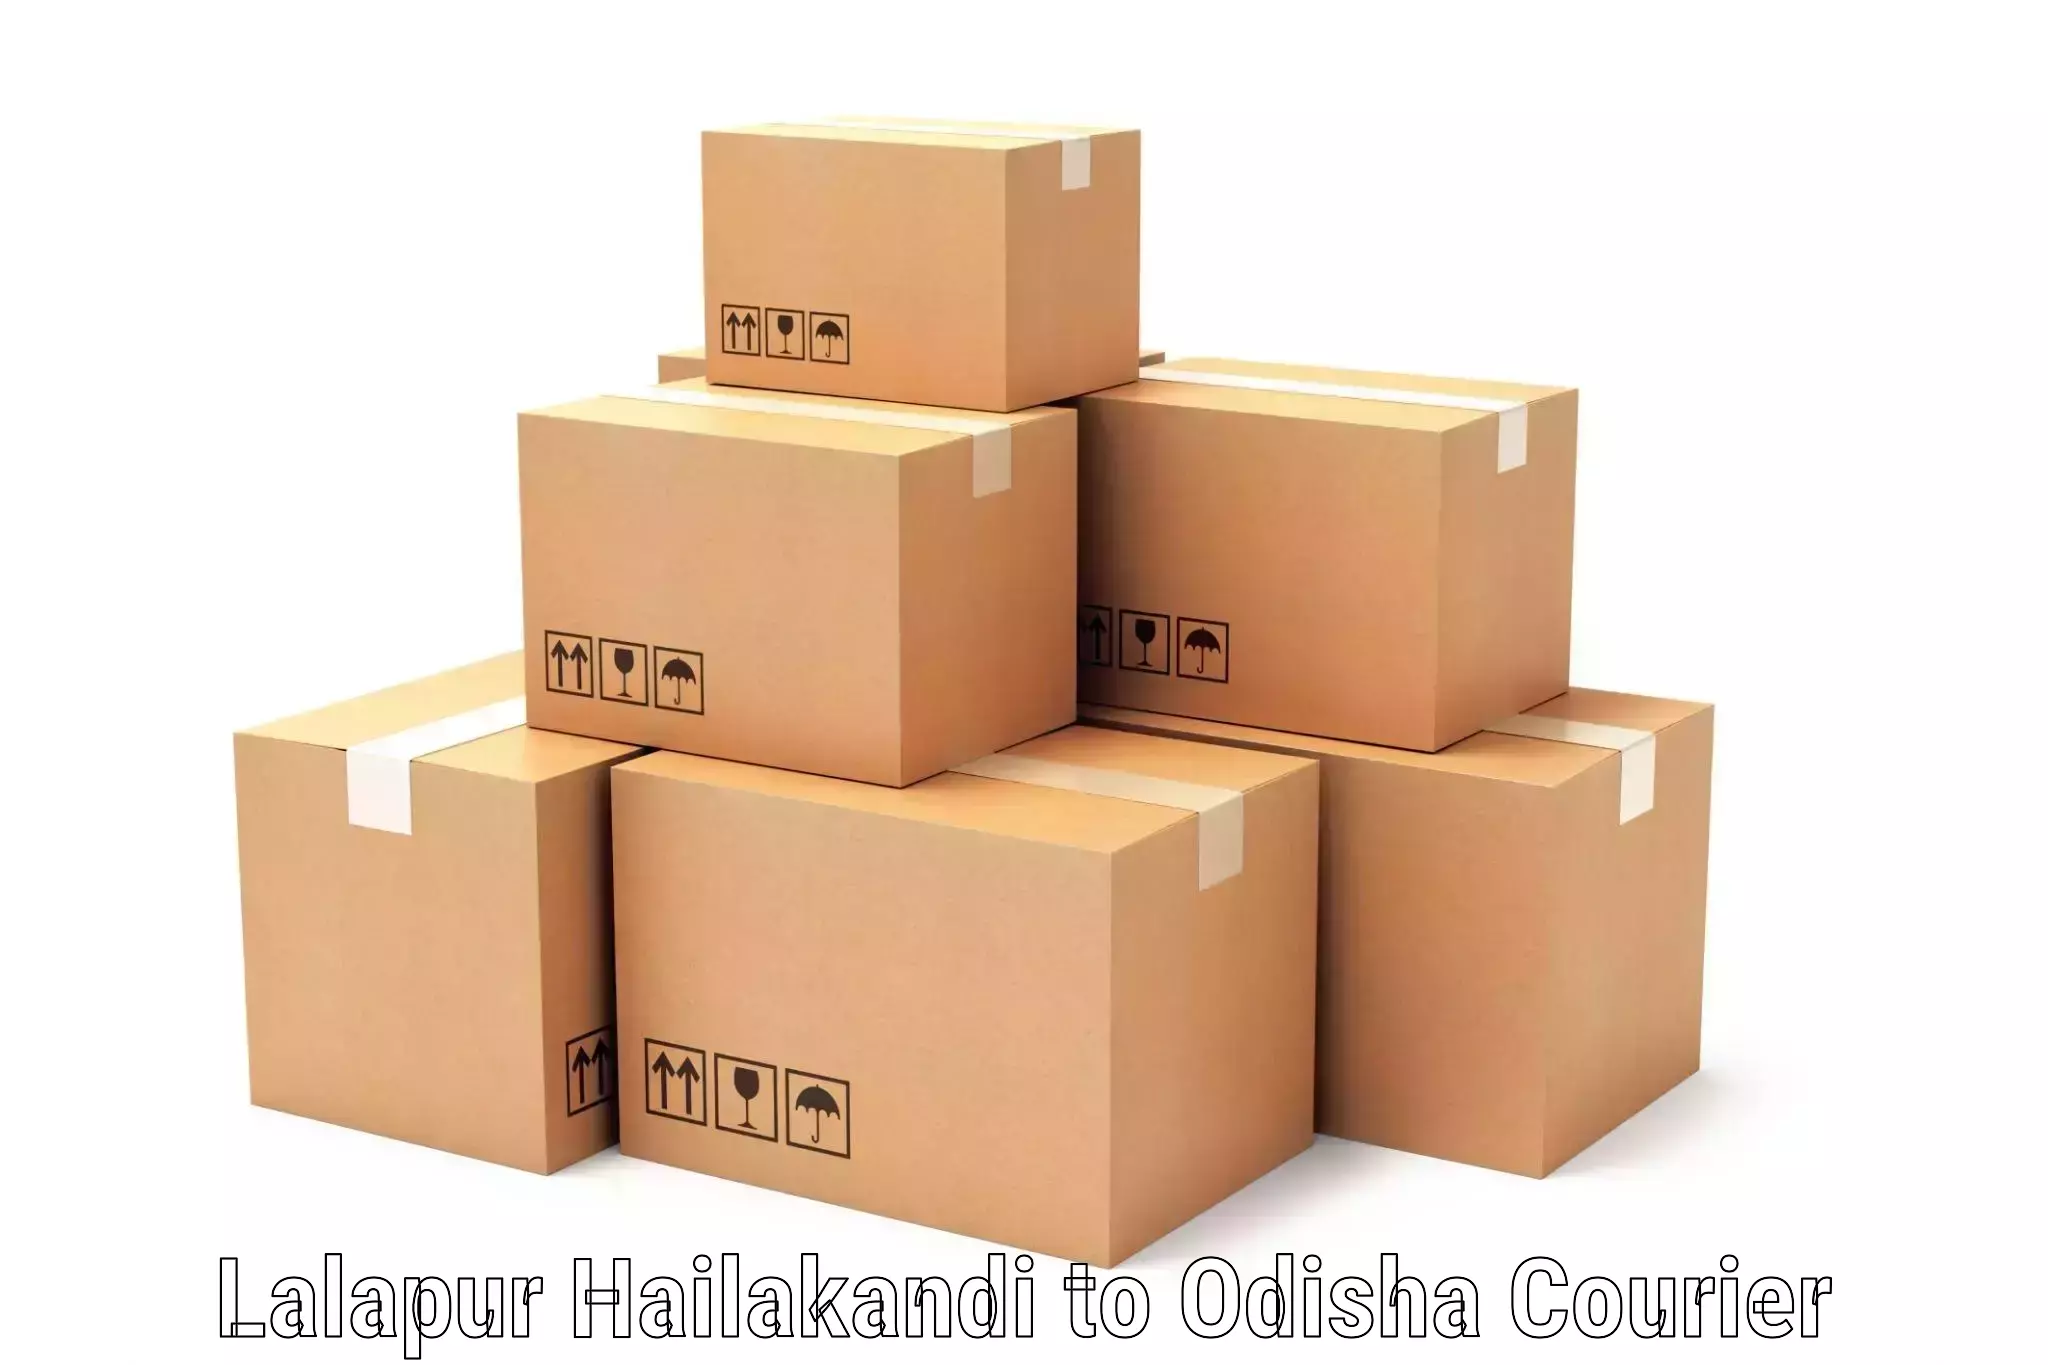 Local courier options in Lalapur Hailakandi to Chandikhol